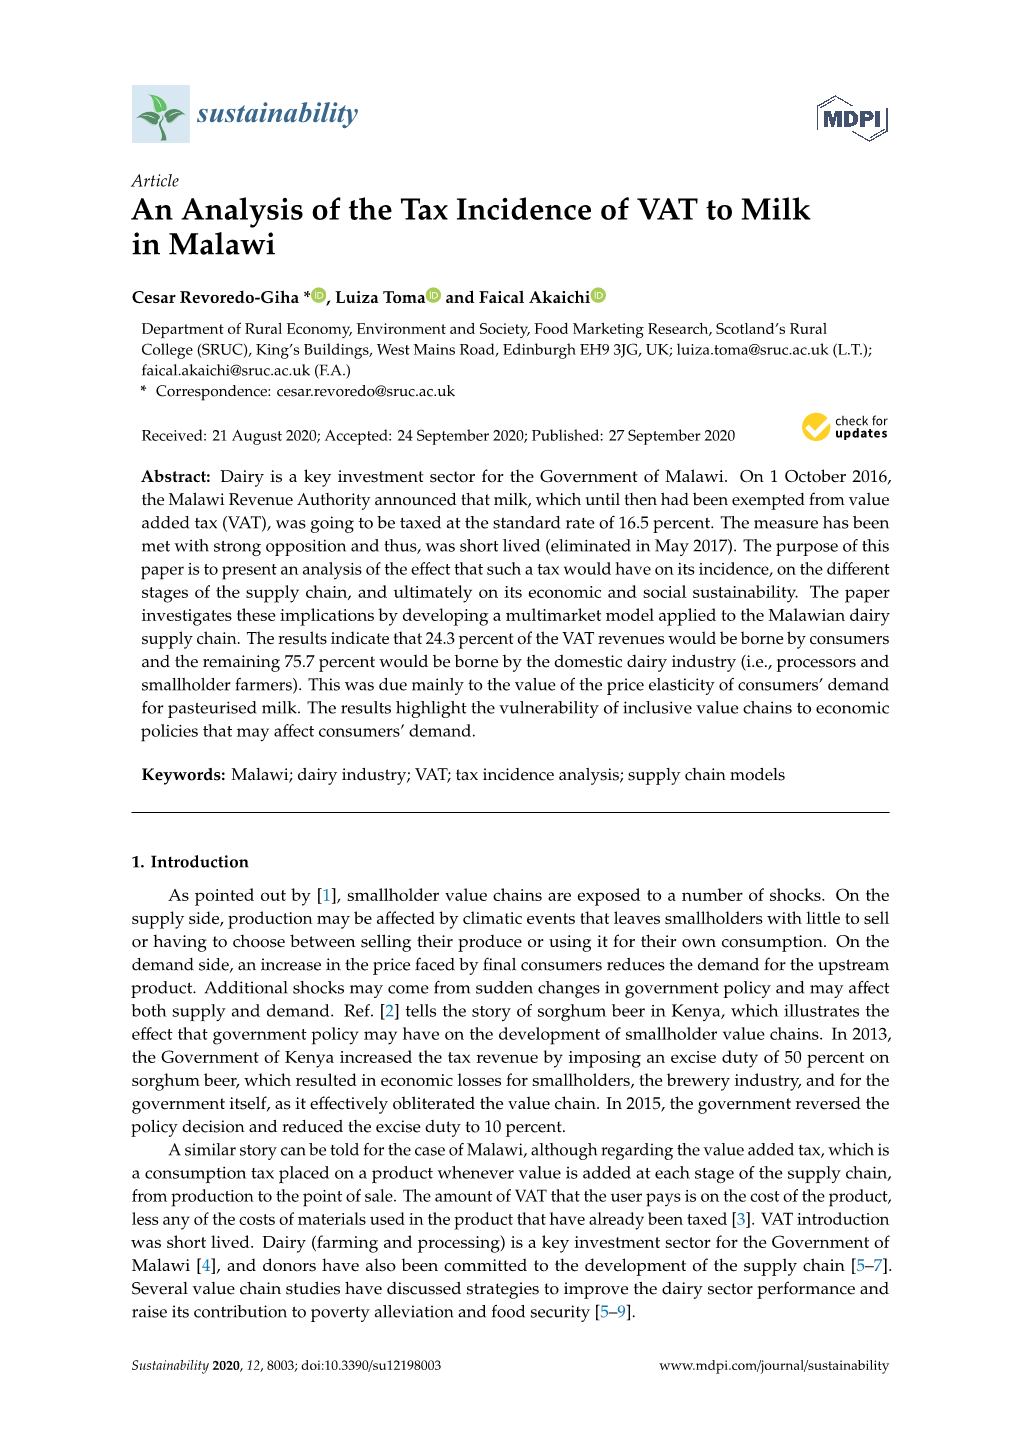 An Analysis of the Tax Incidence of VAT to Milk in Malawi